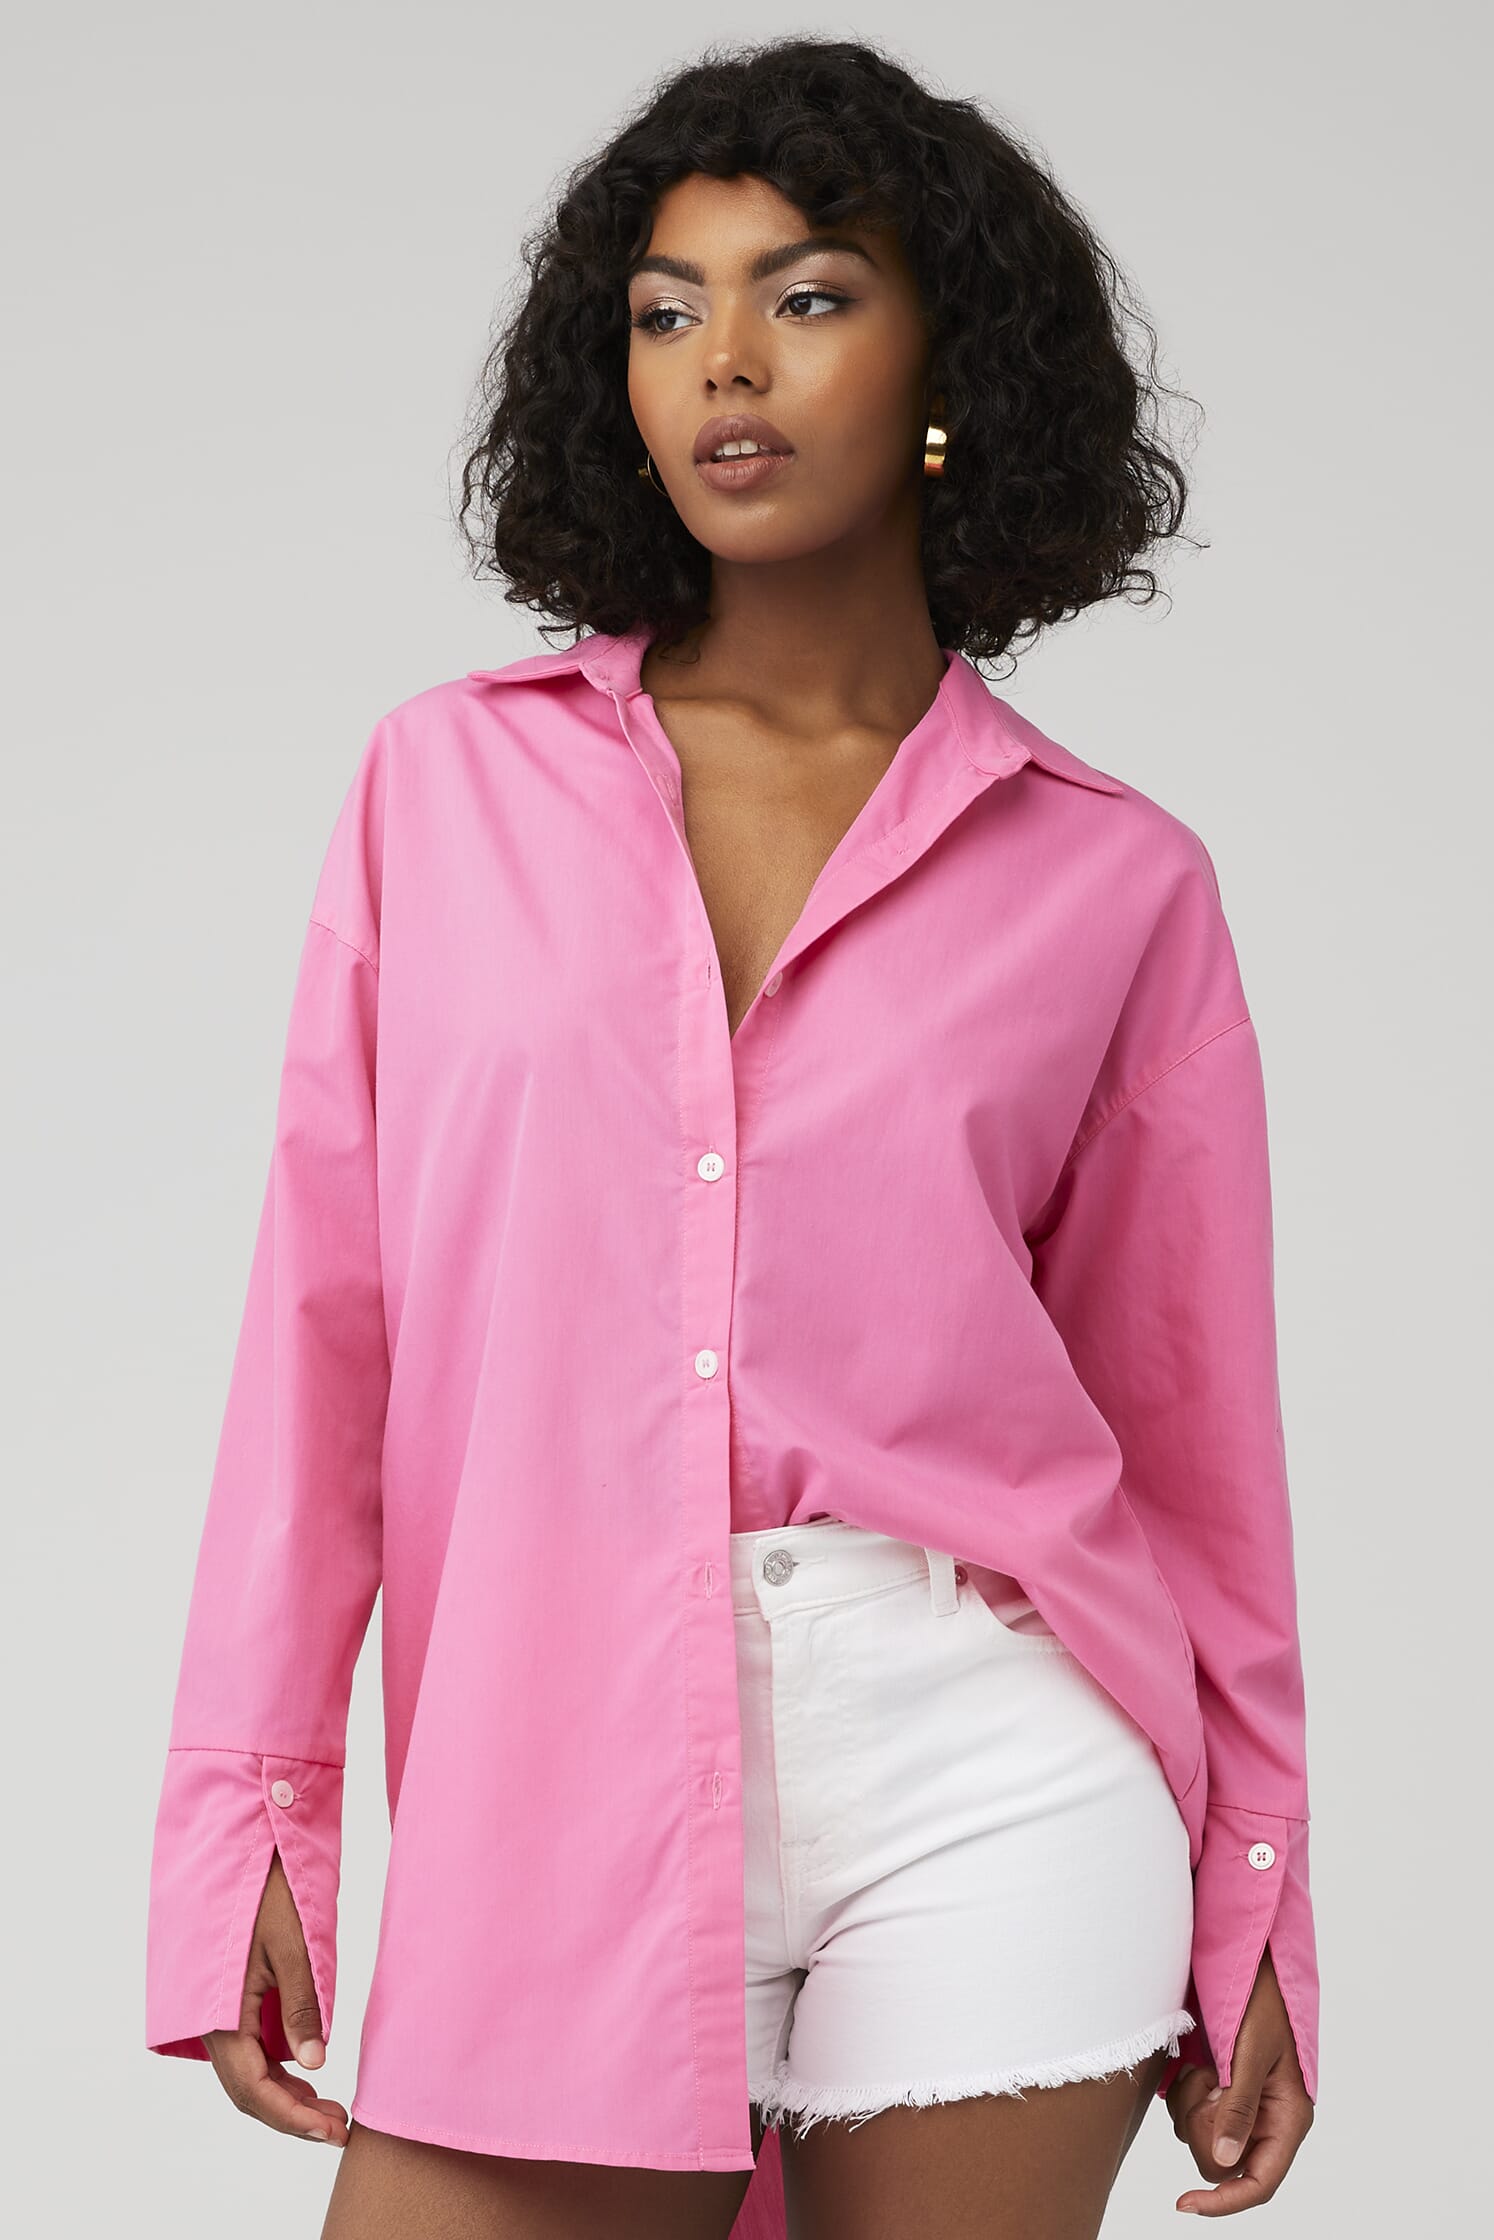 https://images.fashionpass.com/products/capri-shirt-dress-4th-and-reckless-pink-f33-1.jpg?profile=a